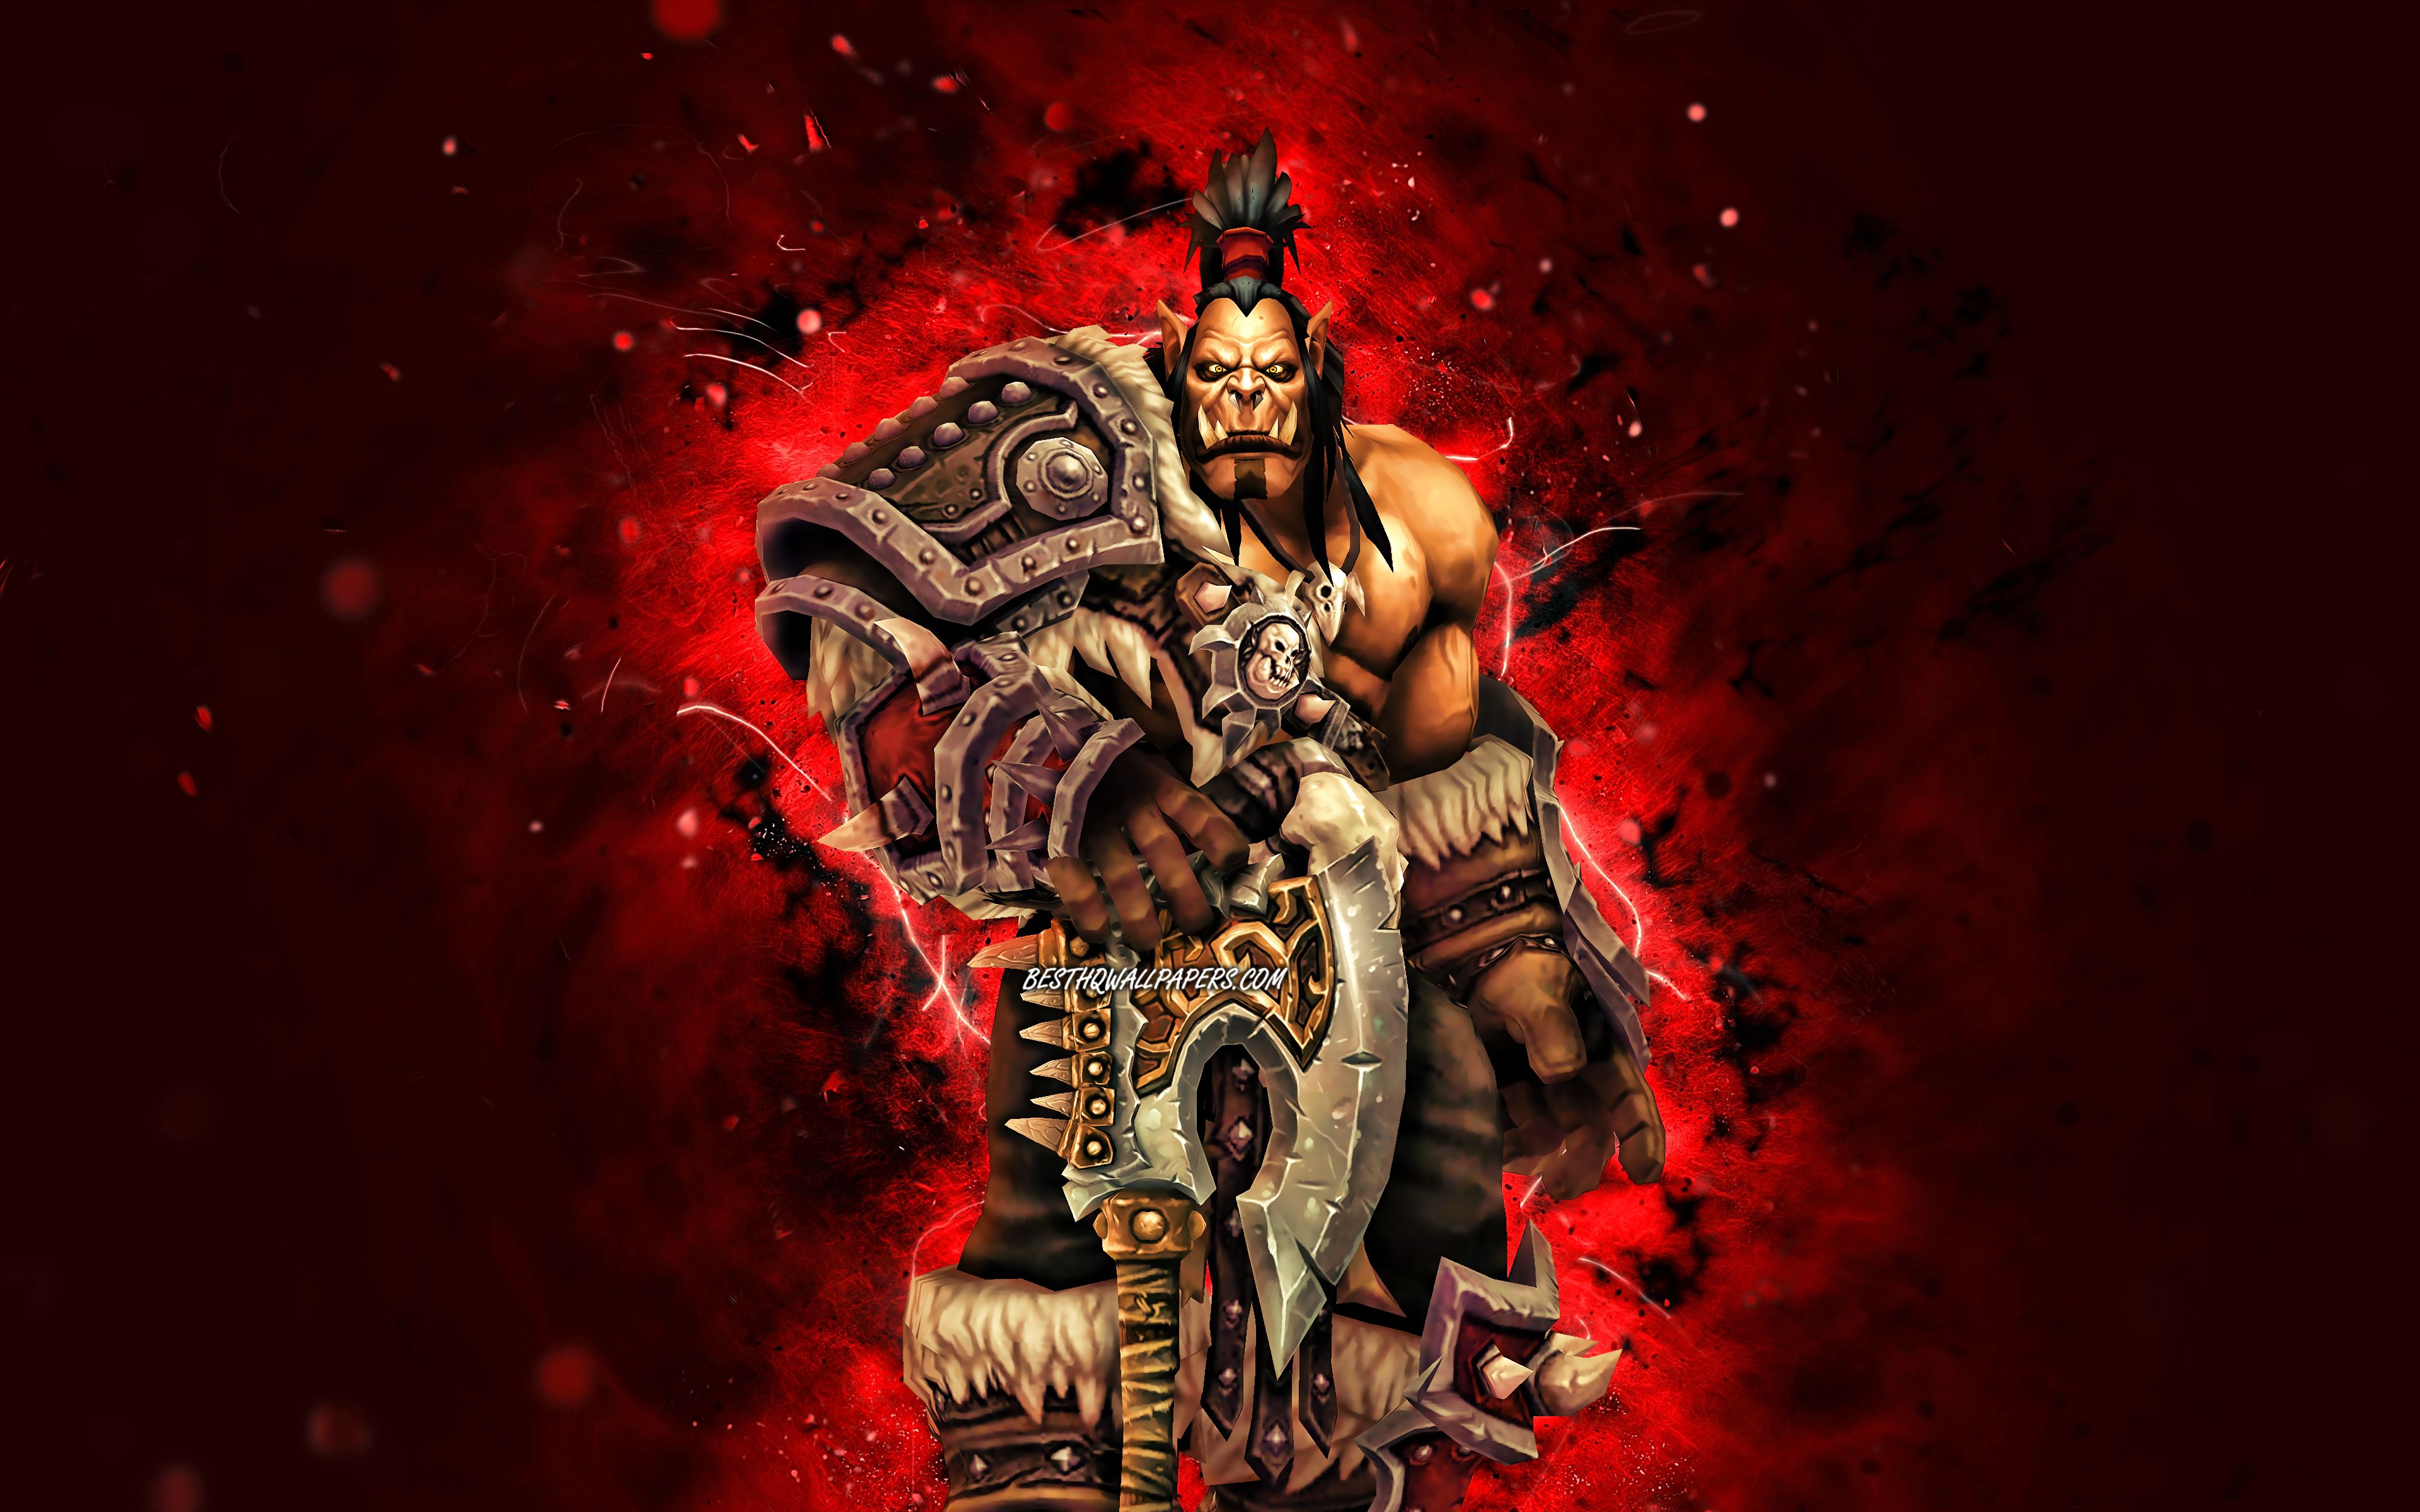 Download wallpaper Grommash Hellscream, 4k, red neon lights, World of Warcraft, Grom, WoW, monstr, World of Warcraft Shadowlands, Grommash Hellscream World of Warcraft for desktop with resolution 3840x2400. High Quality HD picture